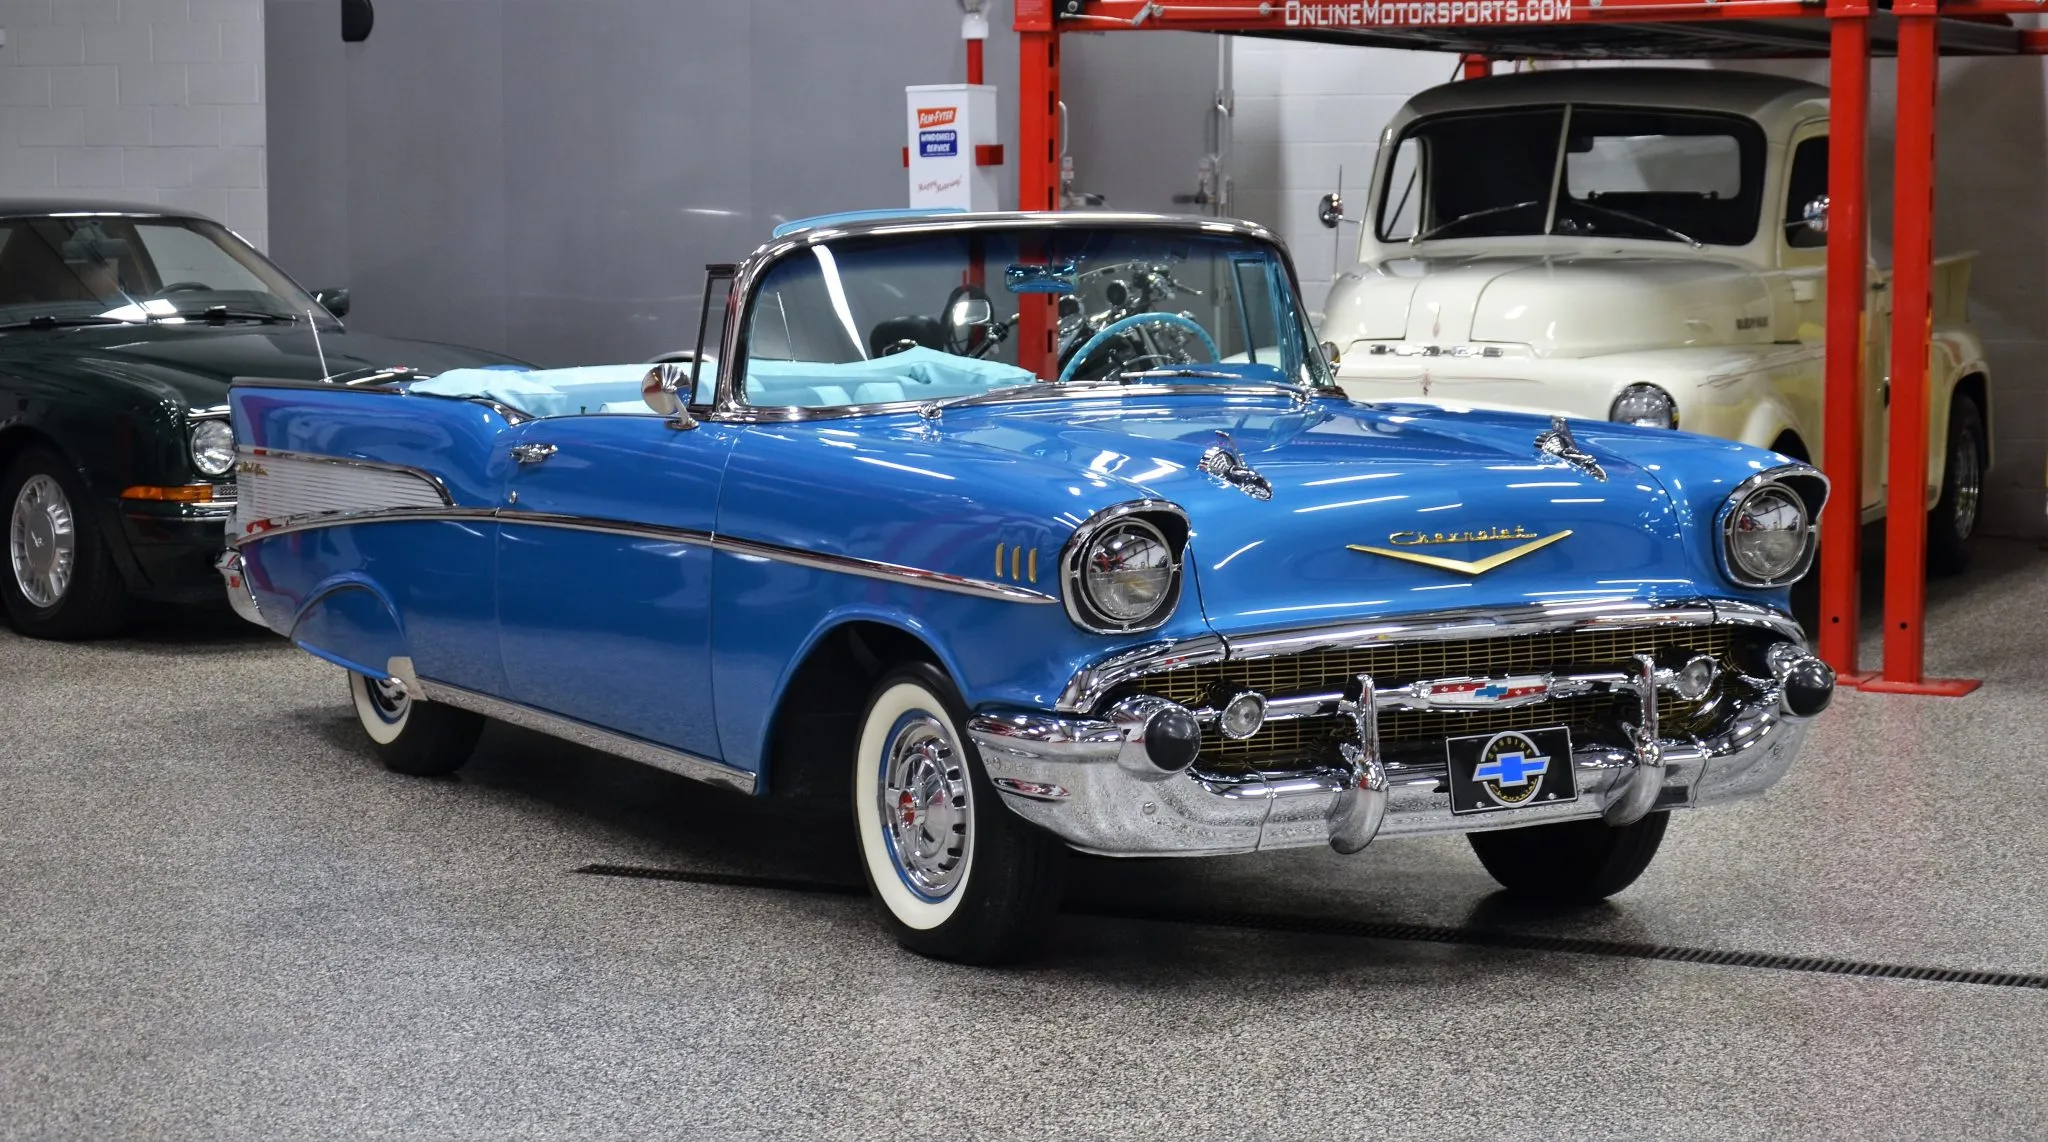 The Timeless Elegance of the 350-Powered 1957 Chevrolet Bel Air 2-Door Convertible